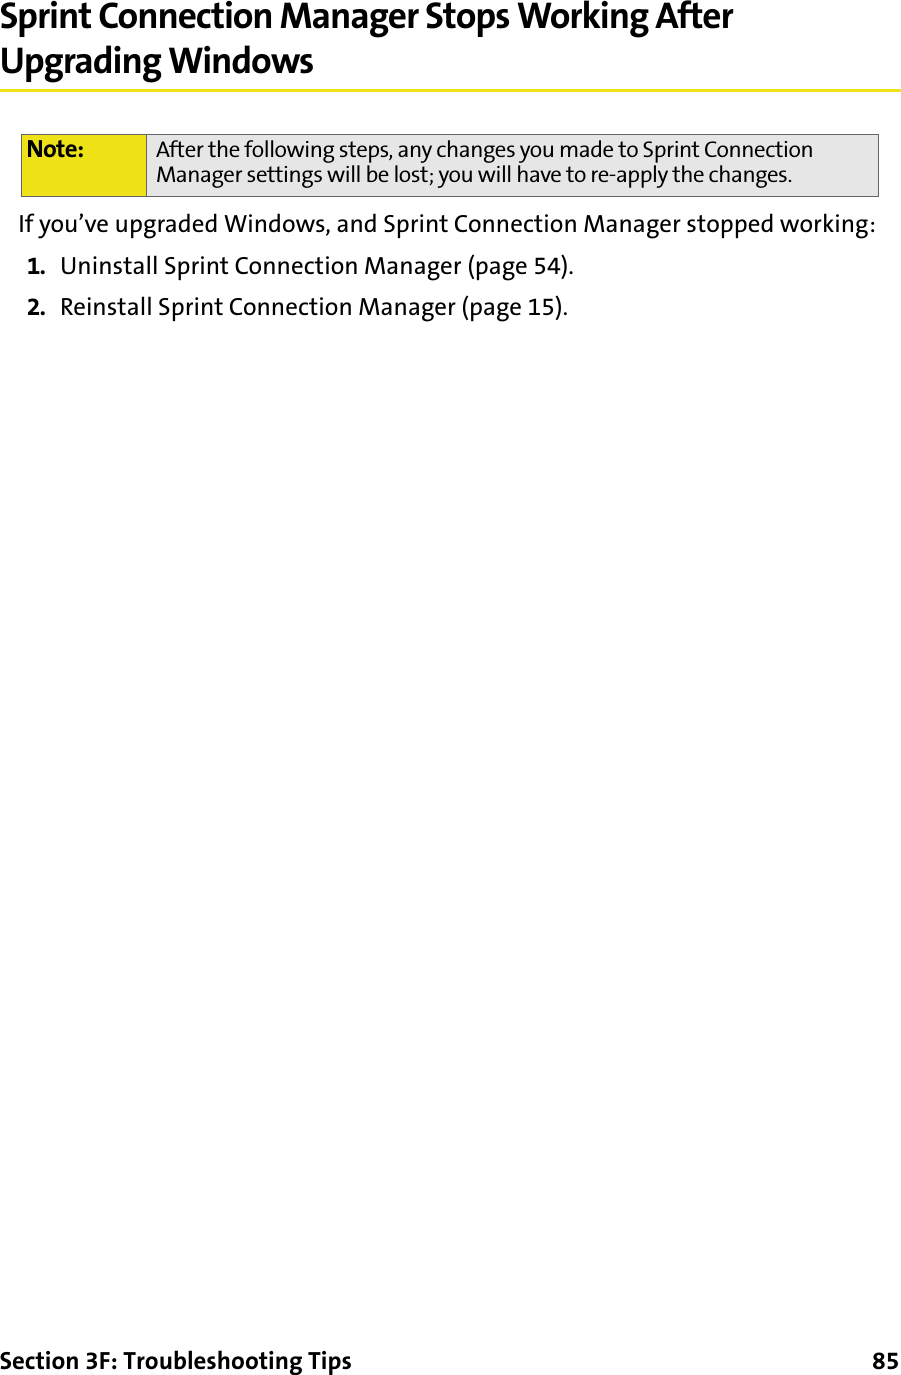 Section 3F: Troubleshooting Tips      85Sprint Connection Manager Stops Working After Upgrading WindowsIf you’ve upgraded Windows, and Sprint Connection Manager stopped working:1. Uninstall Sprint Connection Manager (page 54).2. Reinstall Sprint Connection Manager (page 15).Note: After the following steps, any changes you made to Sprint Connection Manager settings will be lost; you will have to re-apply the changes.